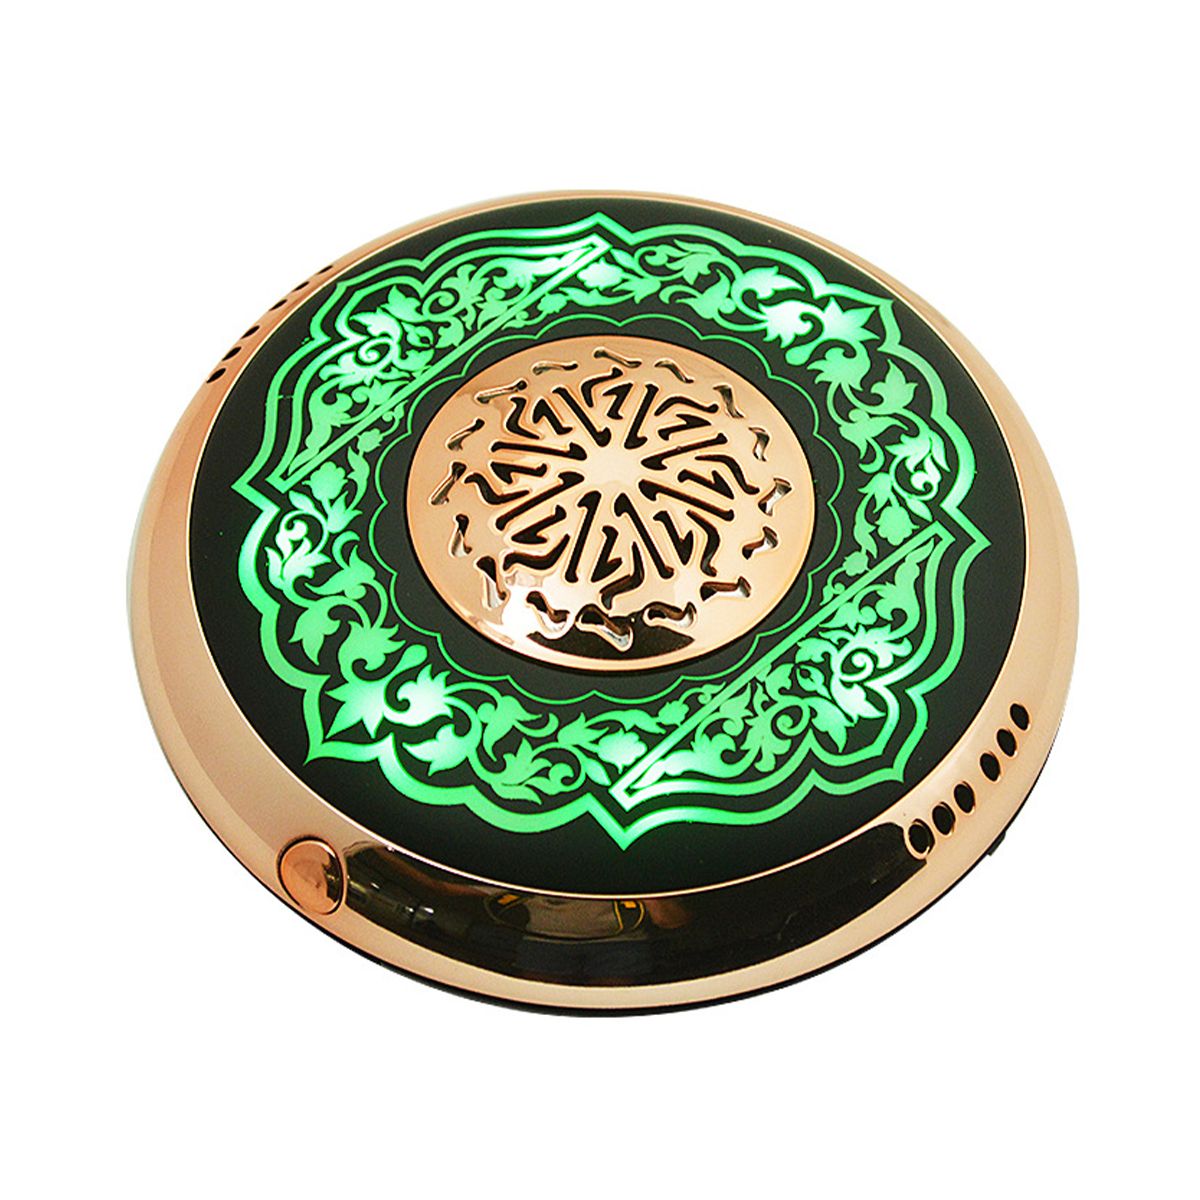 USB-Portable-Wireless-bluetooth-Remote-Control-Colorful-Digital-Quran-Speaker-with-LED-Light-1672022